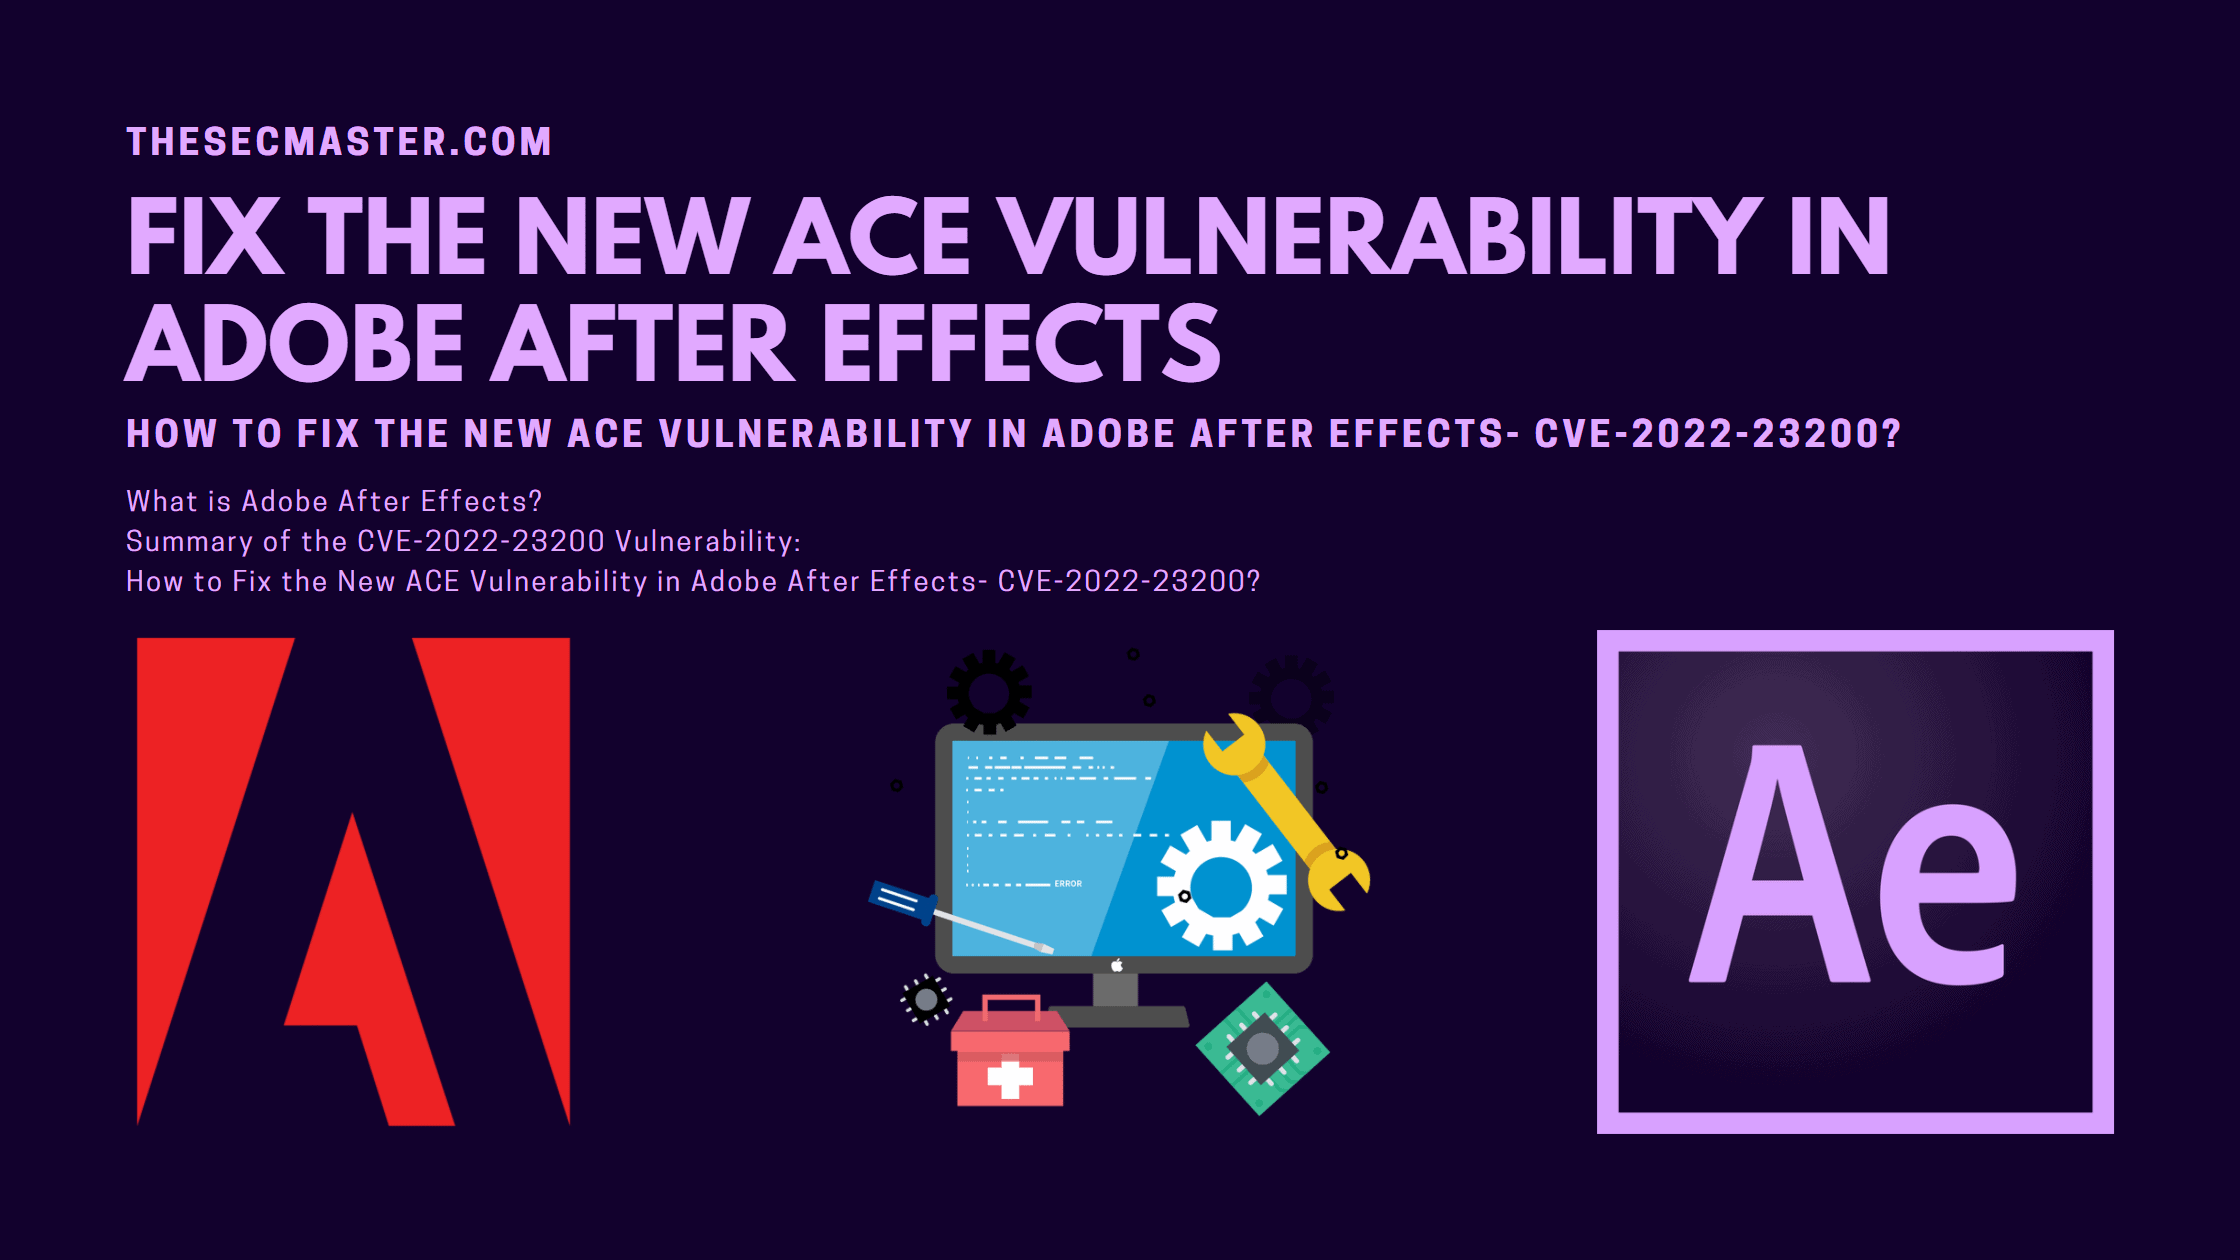 How To Fix The New Ace Vulnerability In Adobe After Effects Cve 2022 23200